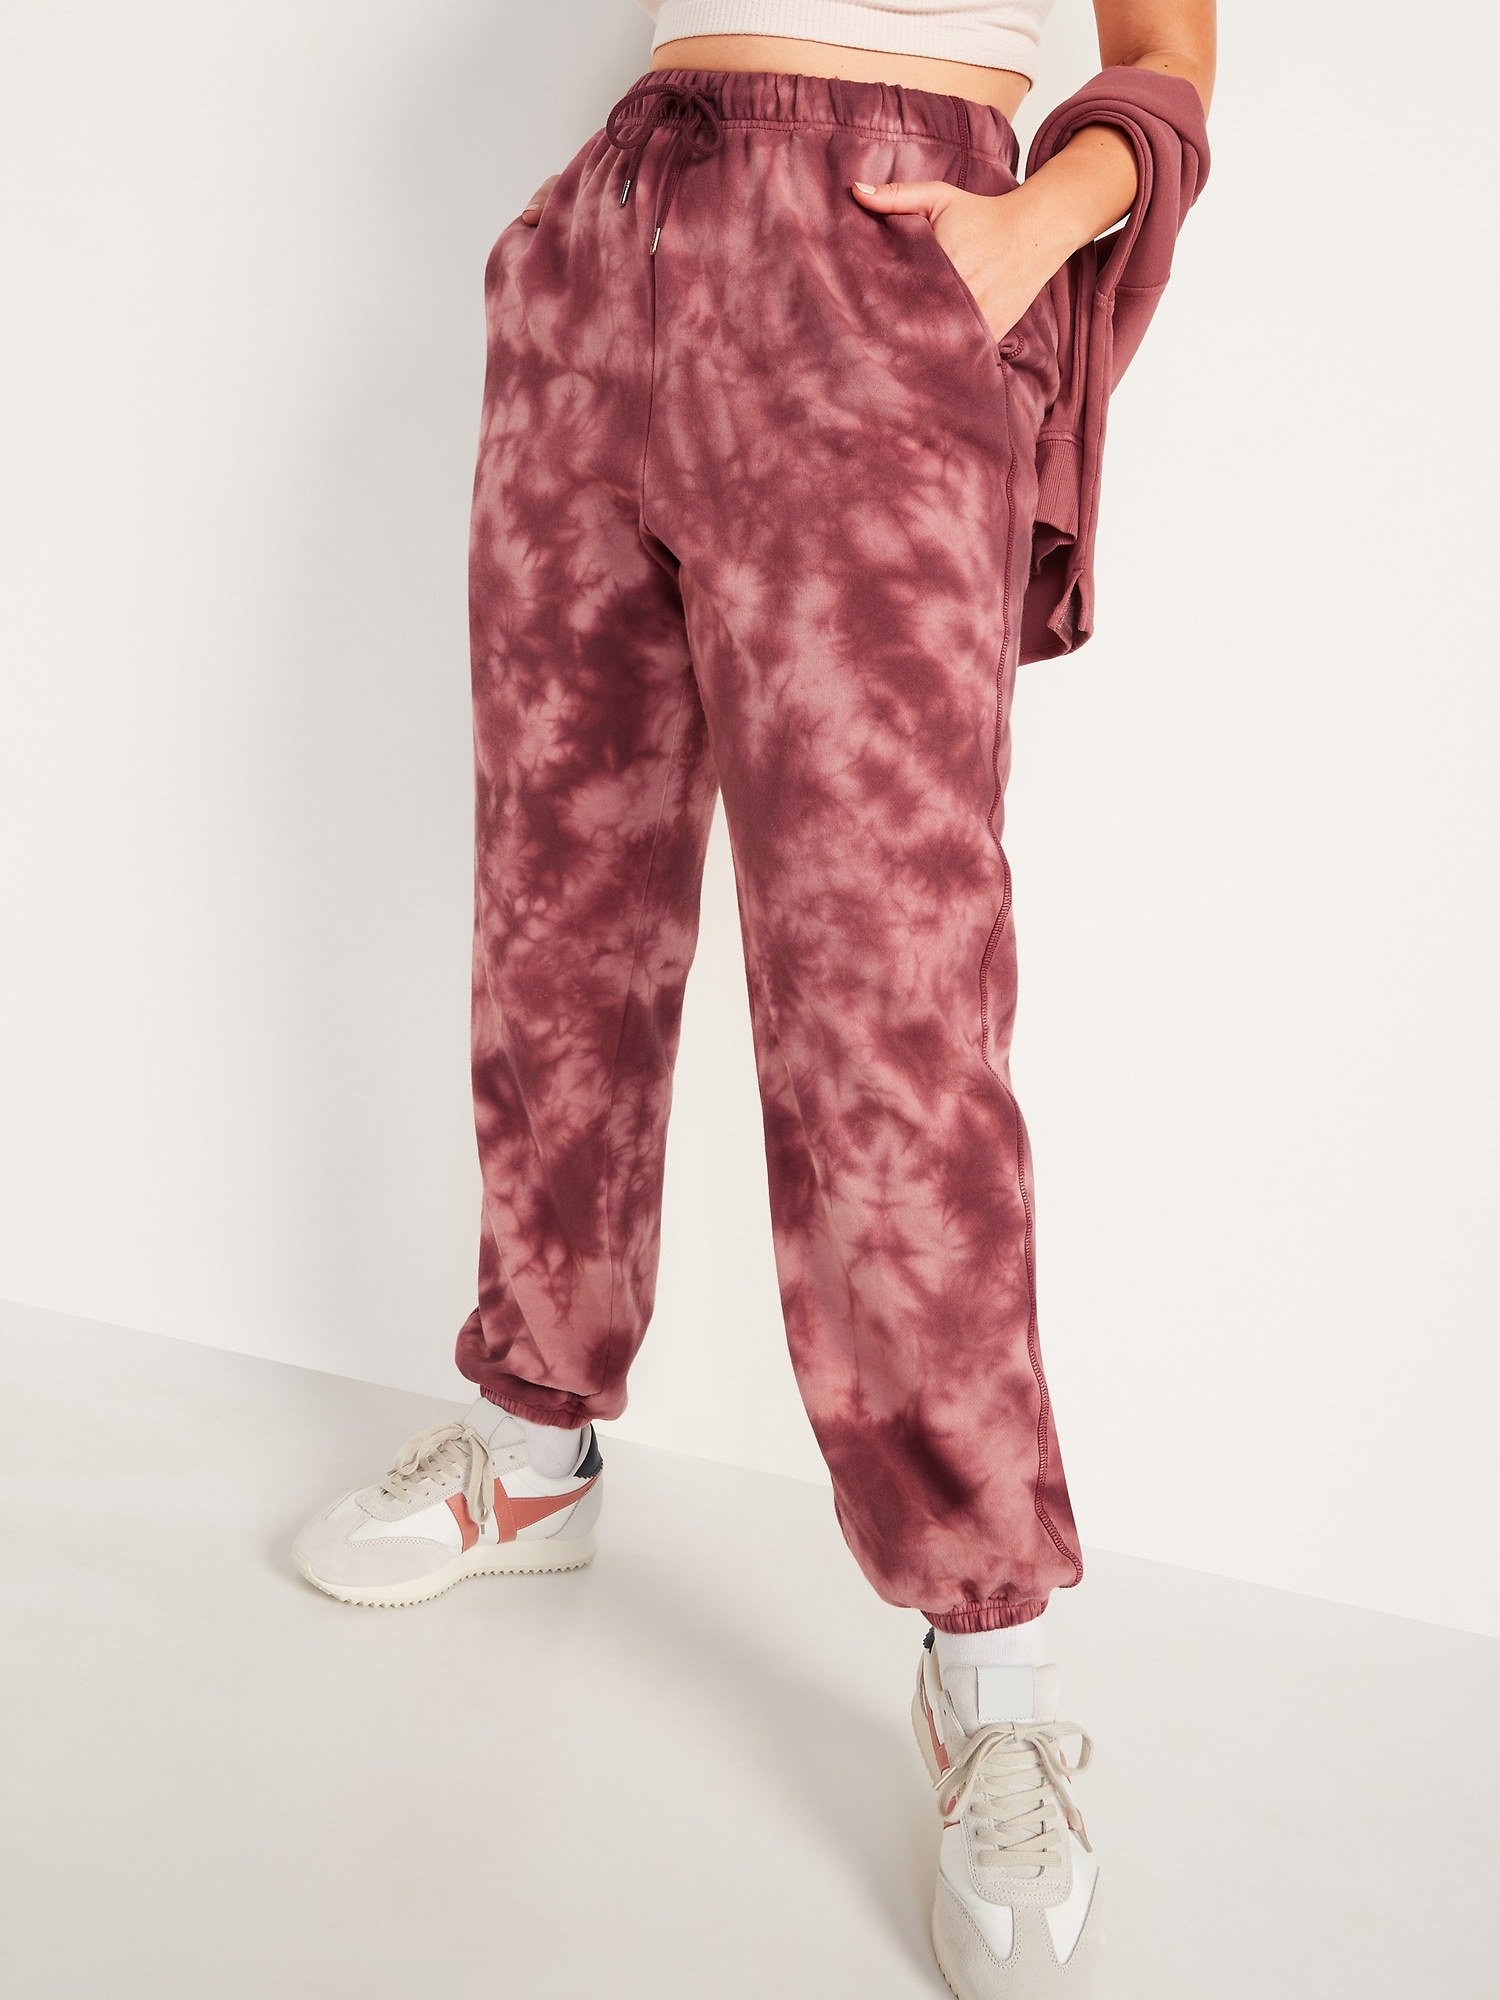 Extra High-Waisted Specially-Dyed Fleece Classic Sweatpants for Women